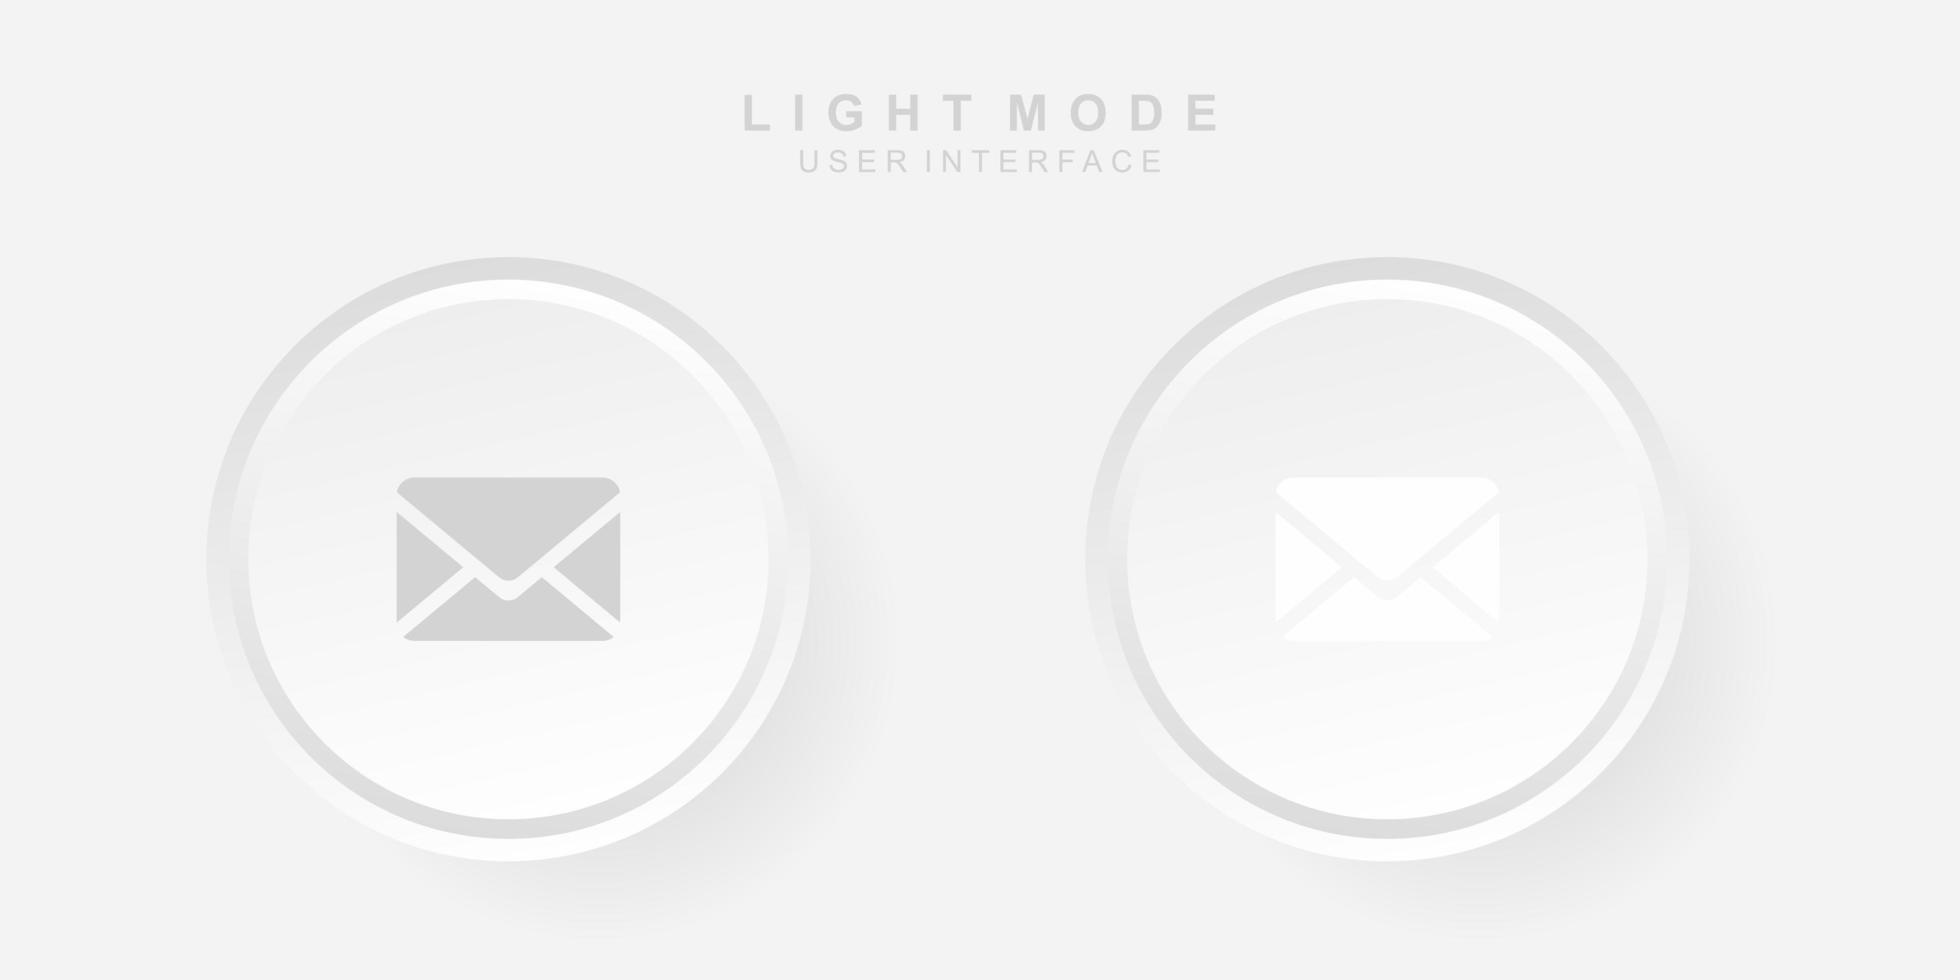 Simple Creative Email User Interface in Light Neumorphism Design vector